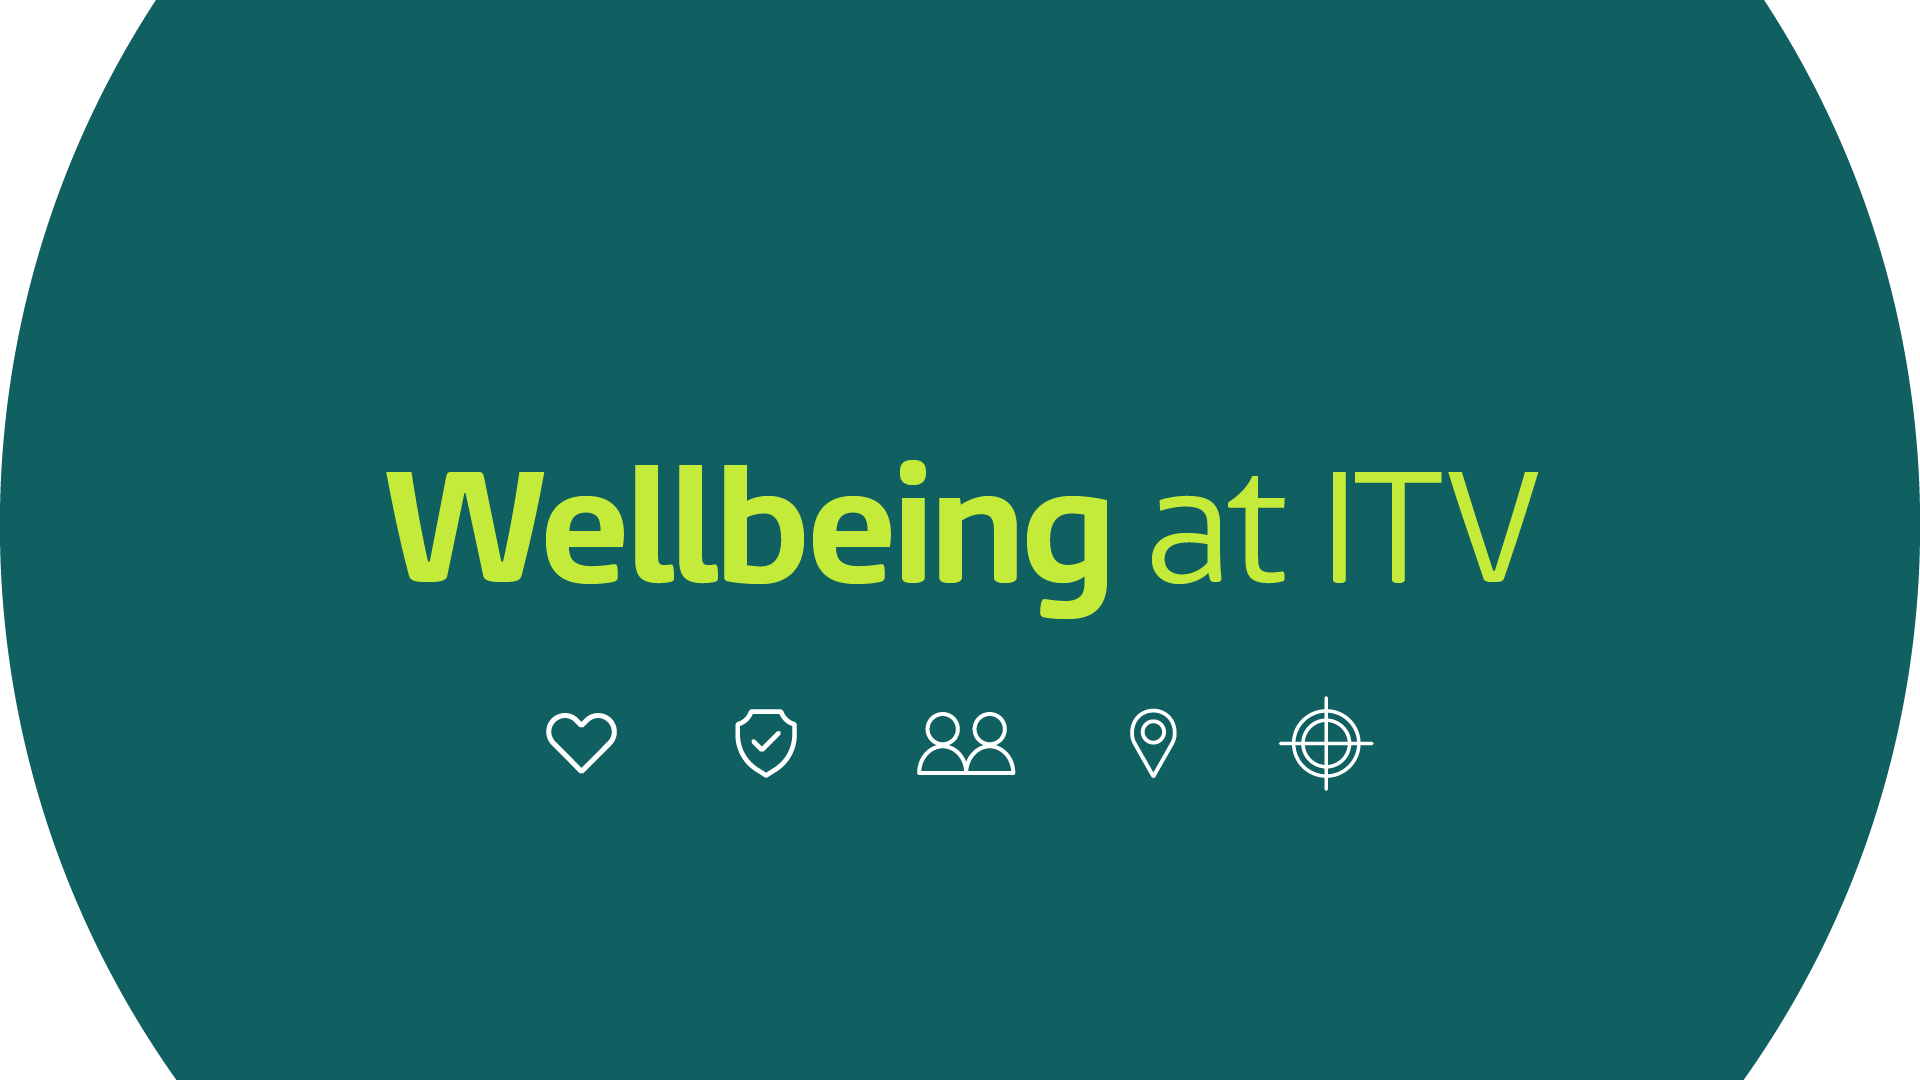 Wellbeing at ITV